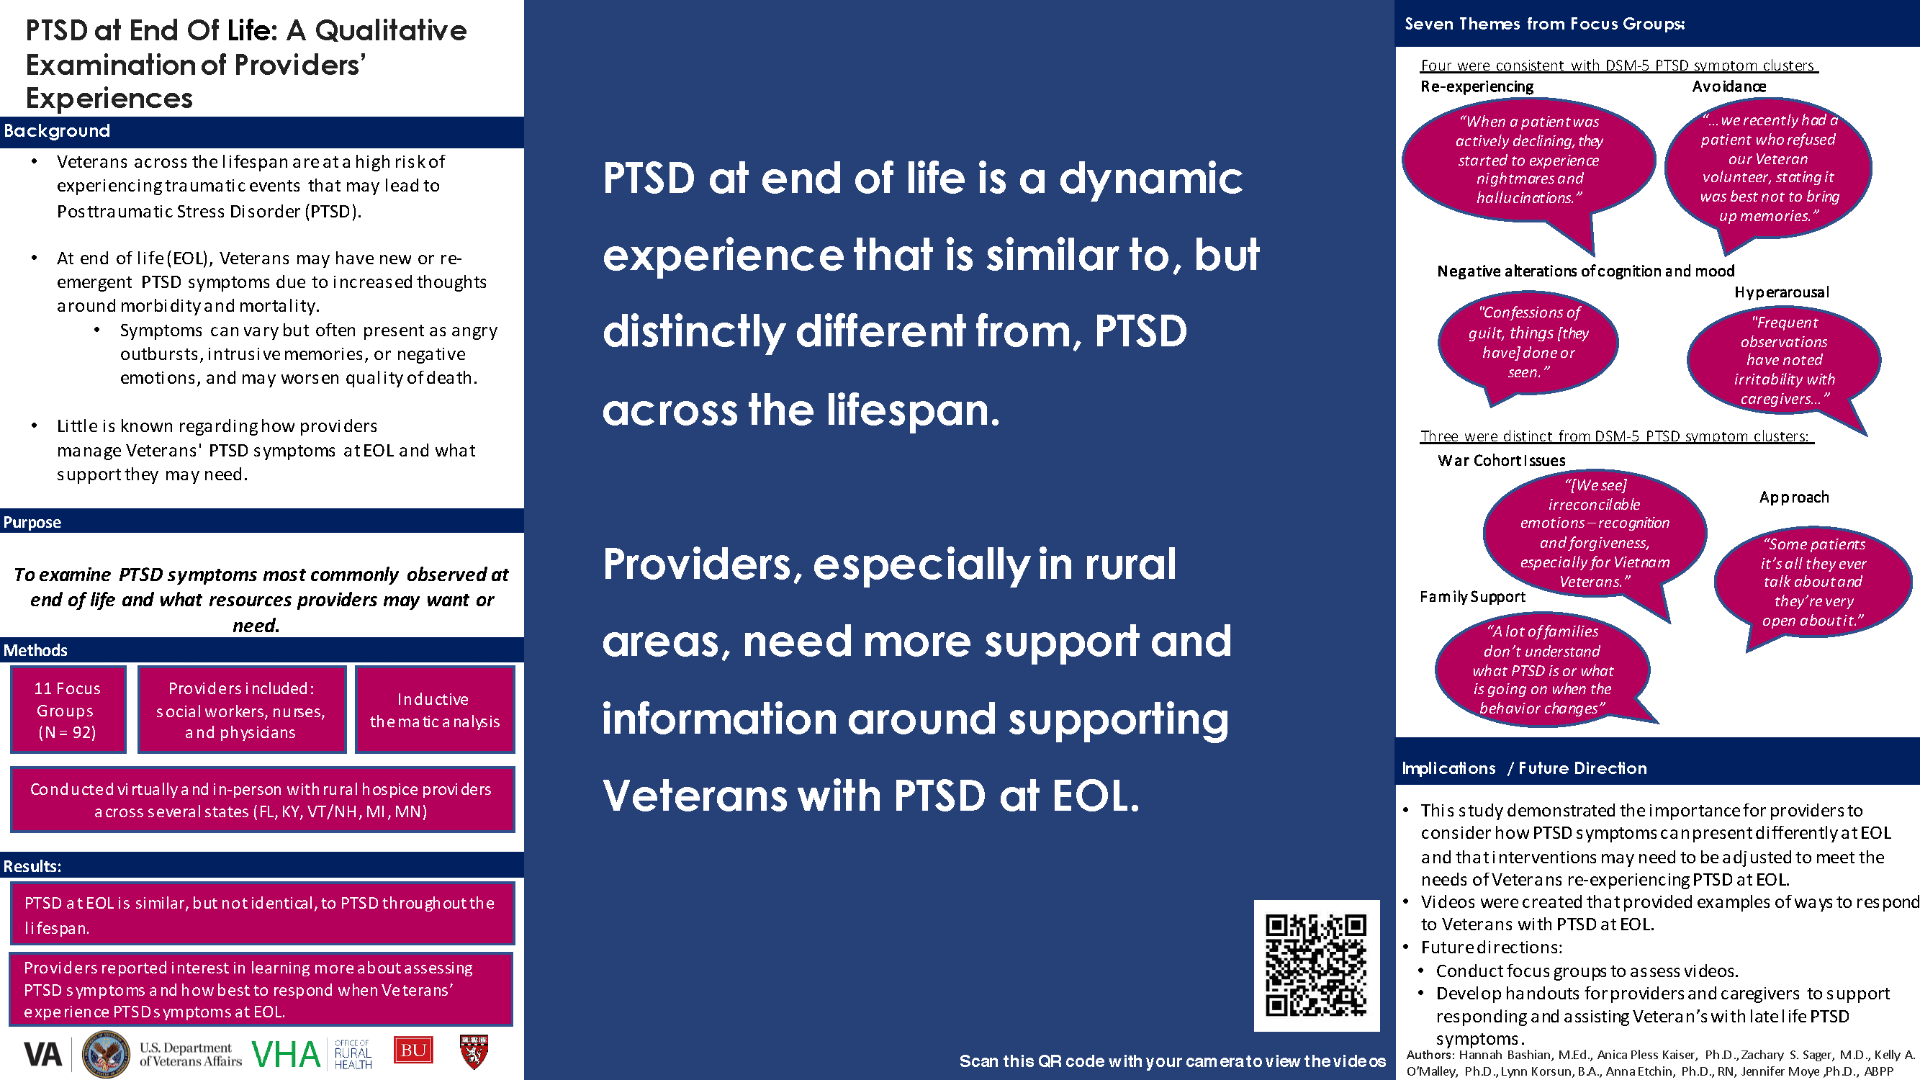 PTSD at End of life: A Qualitative Examination of Providers’ Experiences